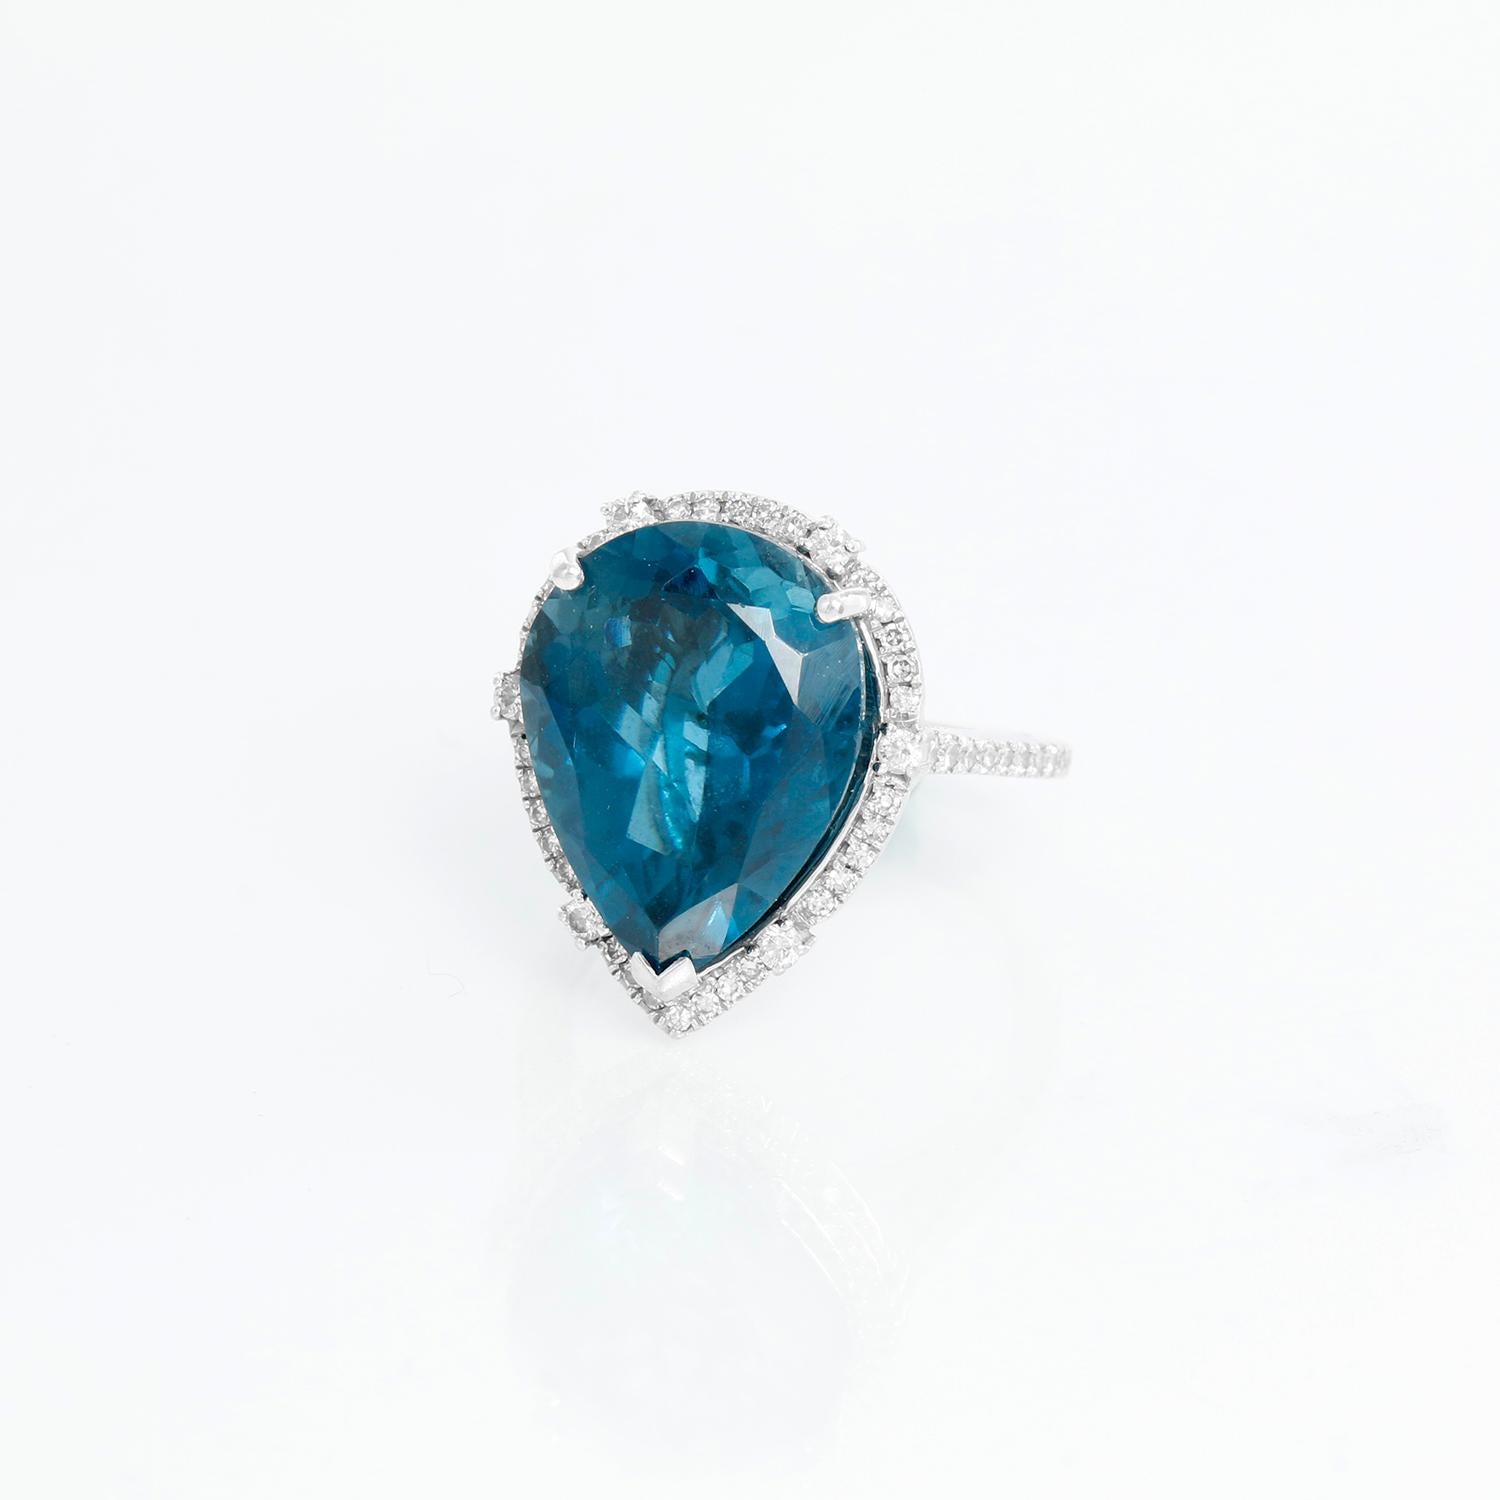 Effy 14K White Gold London Blue Topaz Diamond Ring  - Set in 14K White gold with a Pear Blue Topaz weighing 10.85 cts. and Round diamonds weighing .36 cts. Size 5.25. Pre-owned with Effy box.